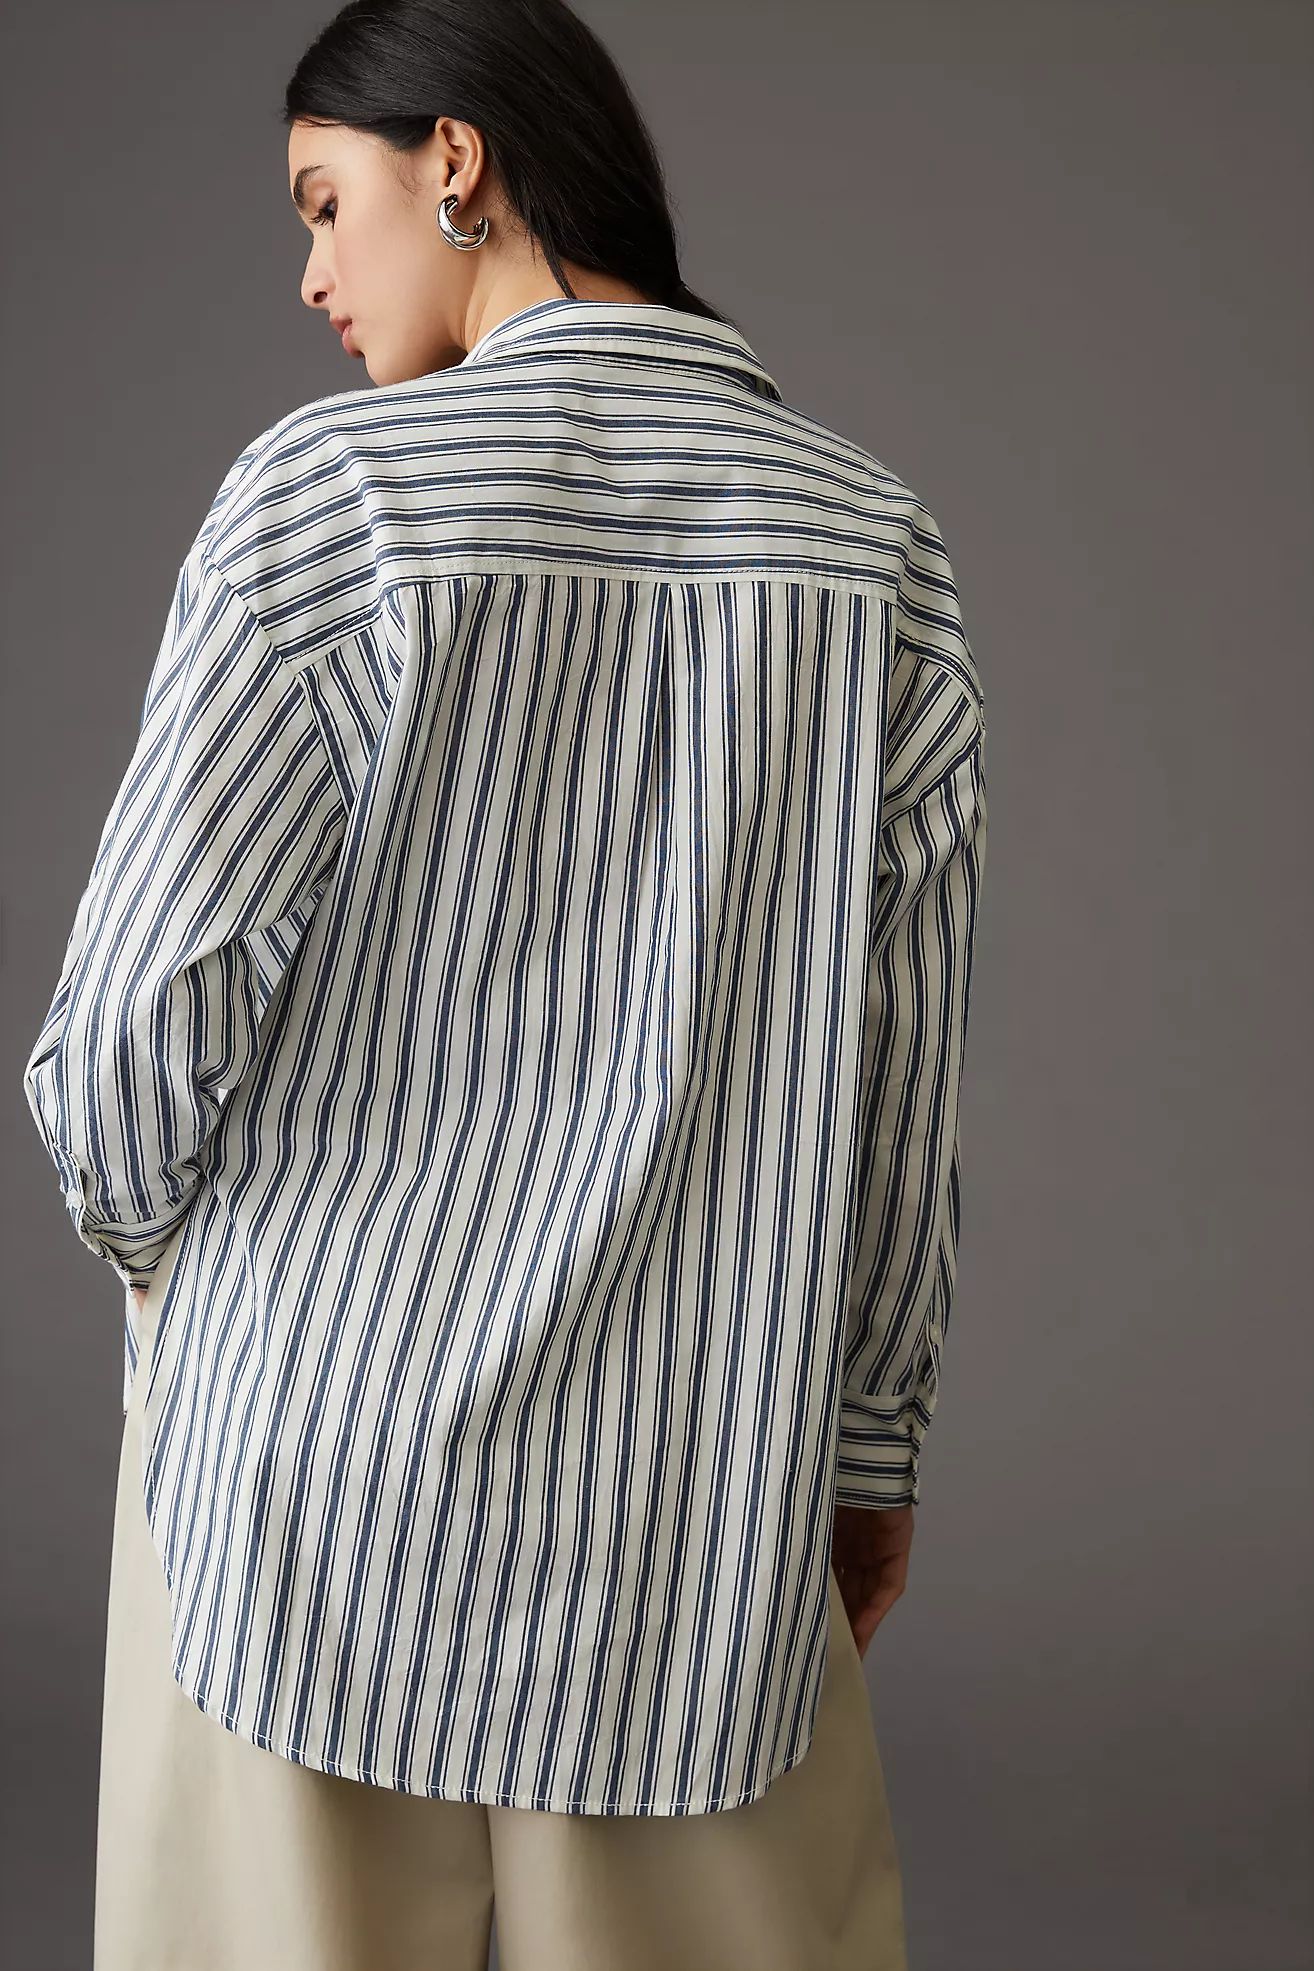 The Bennet Buttondown Shirt by Maeve | Anthropologie (UK)